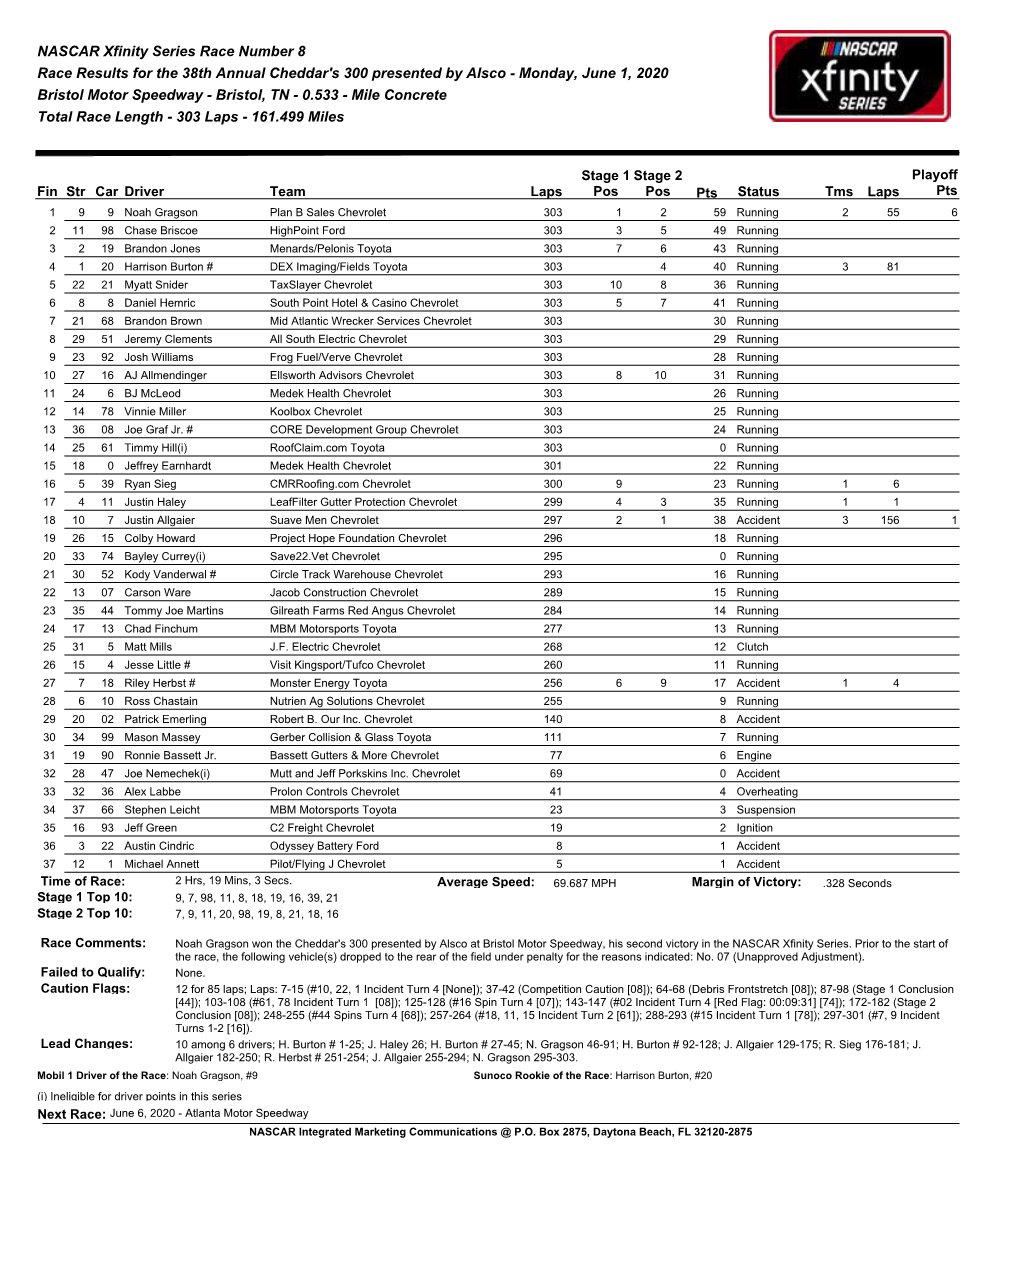 NASCAR Xfinity Series Race Number 8 Race Results for the 38Th Annual